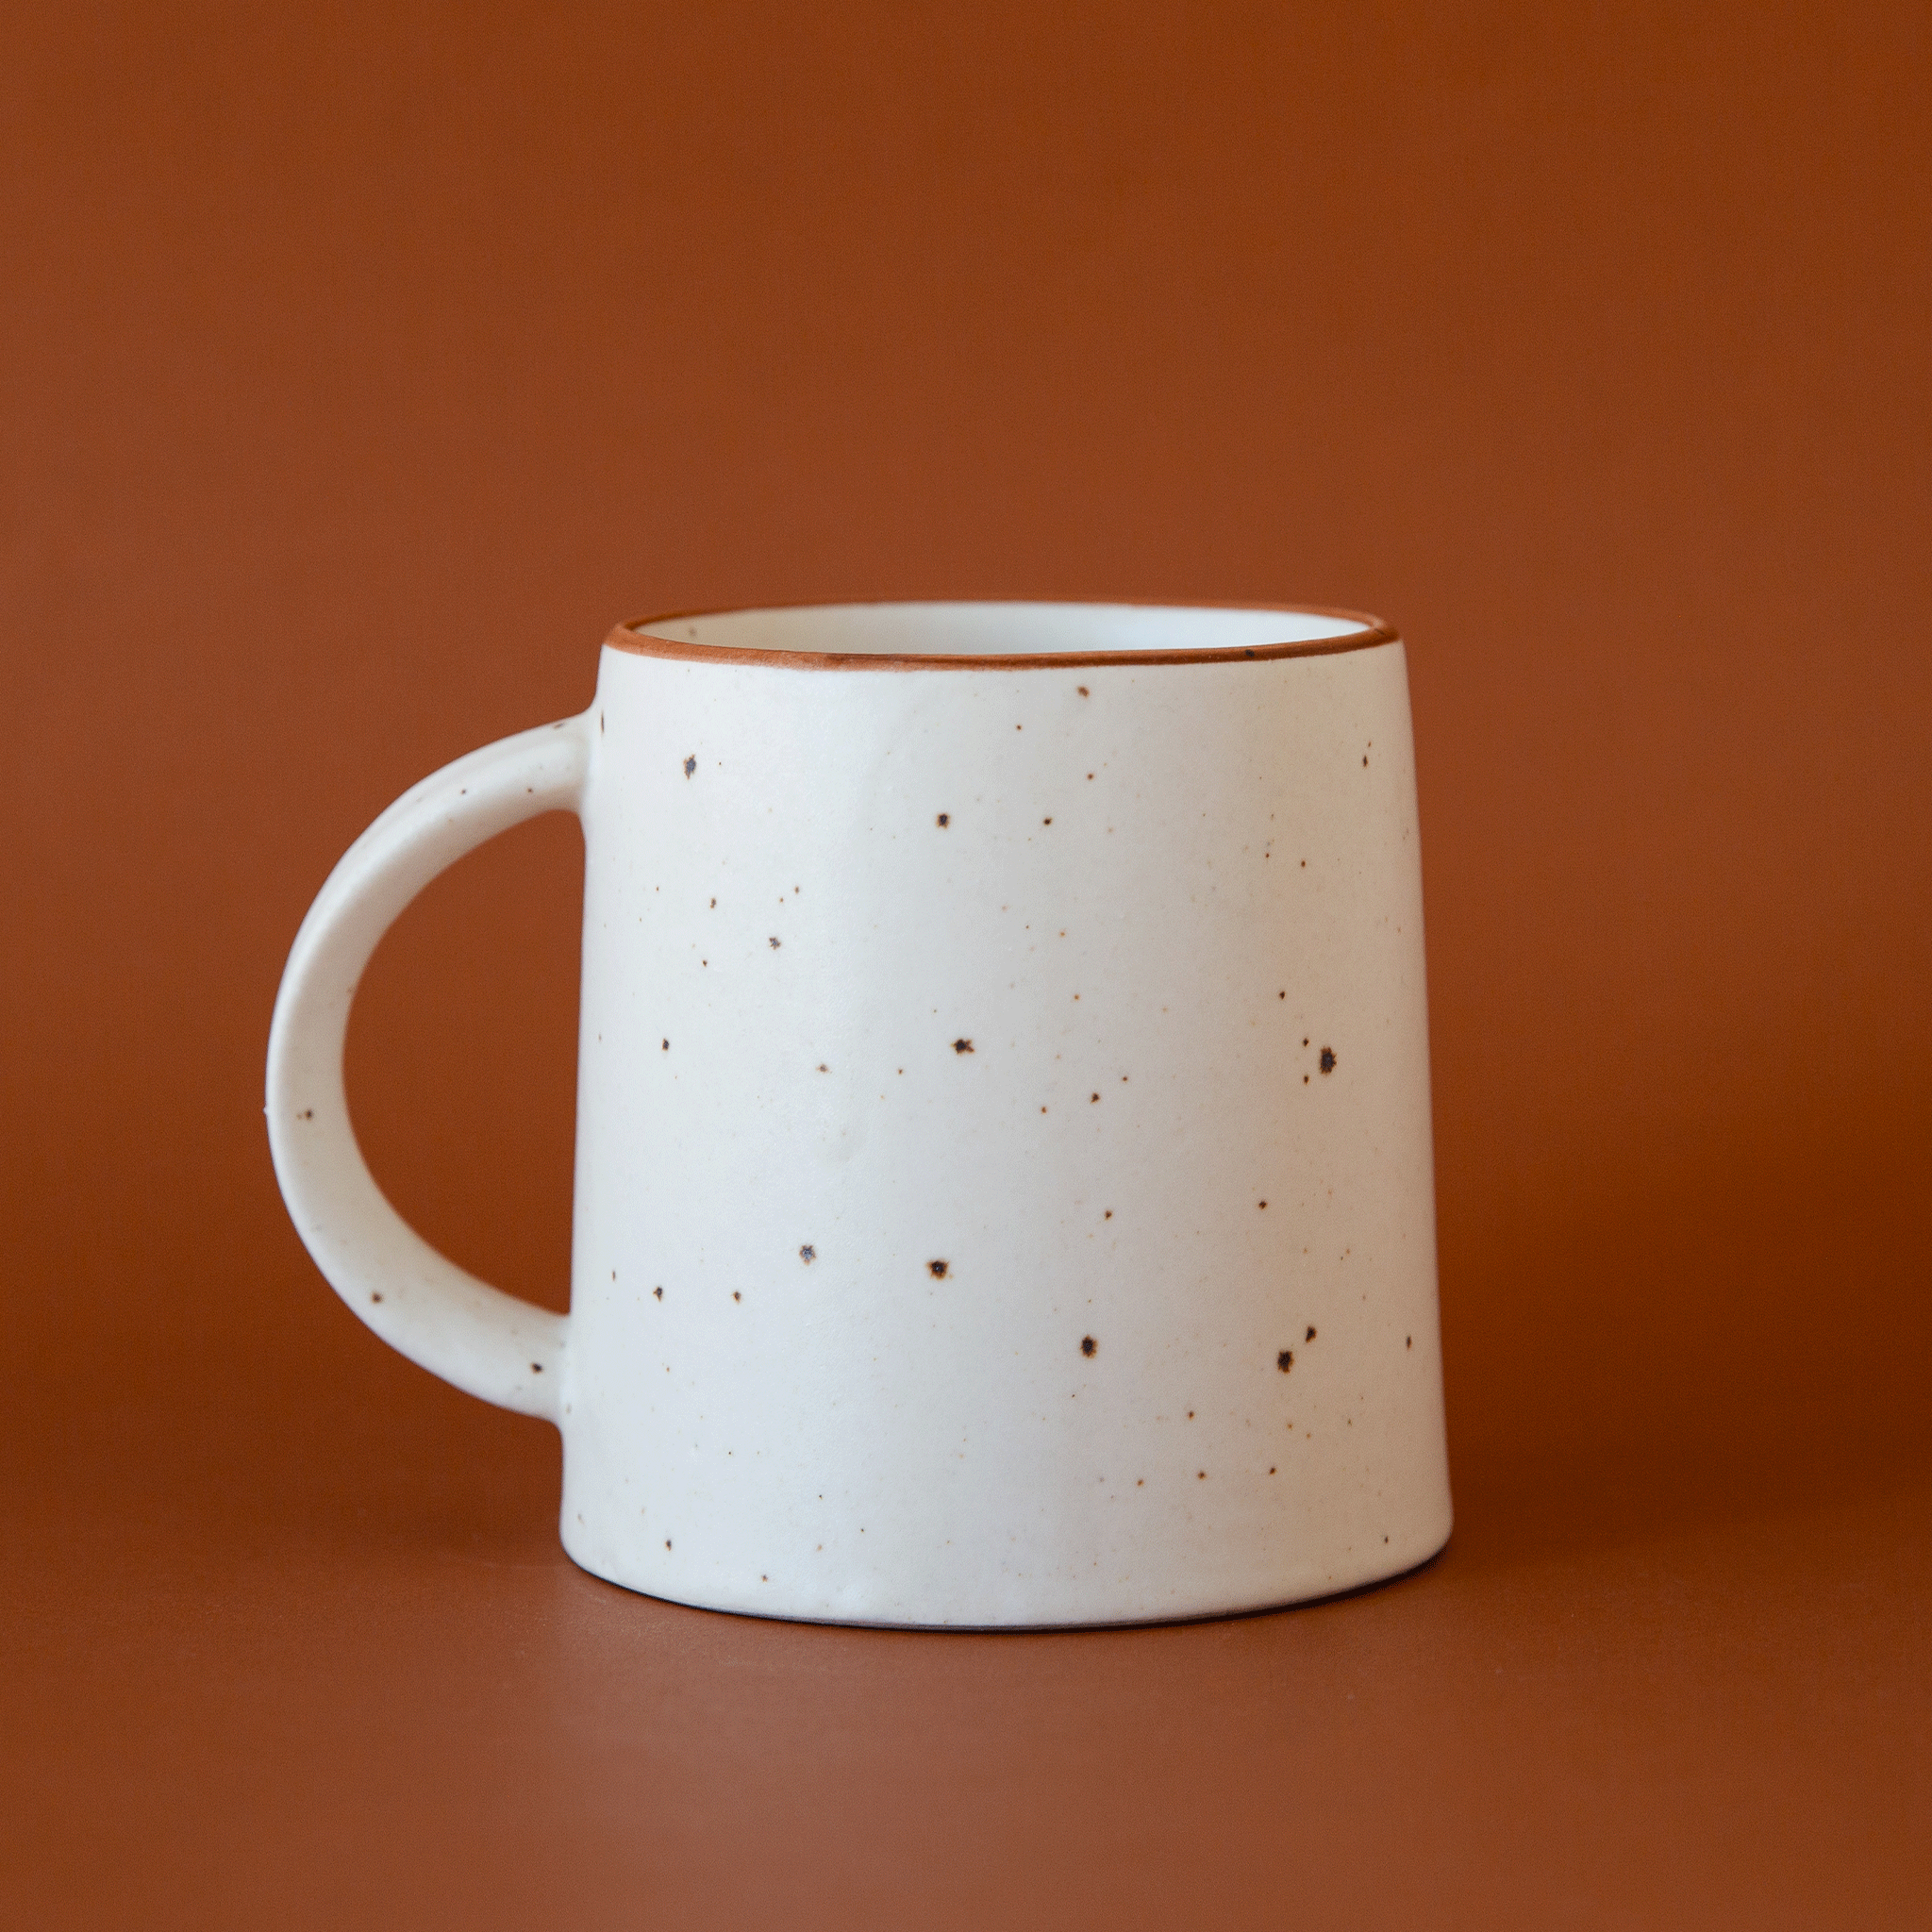 On a burnt orange background is a white and brown speckled ceramic mug with a curved handle.